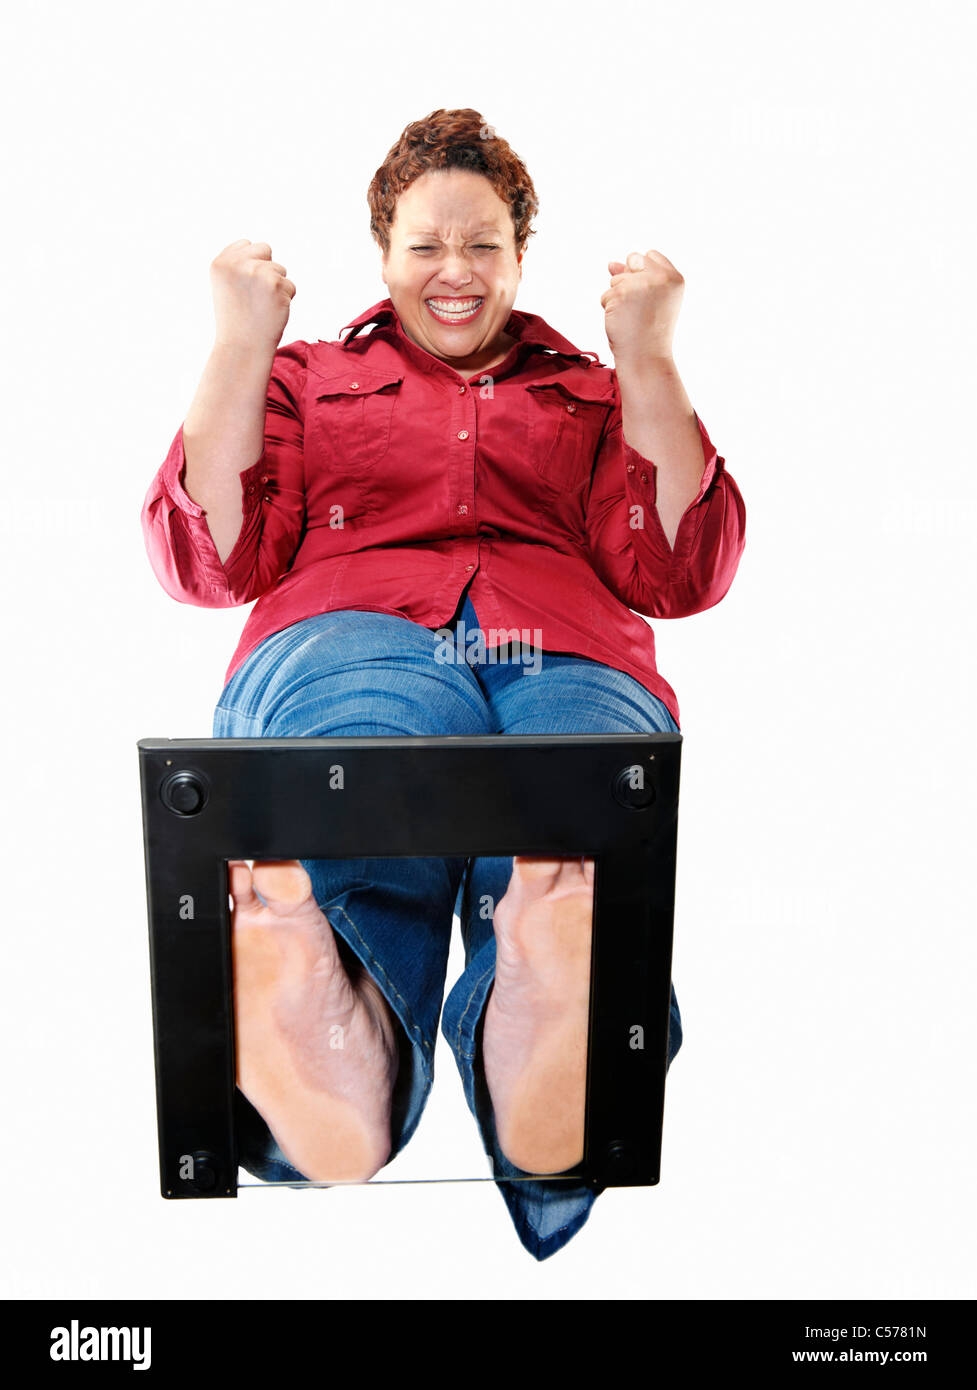 Large woman cheering on scales Stock Photo